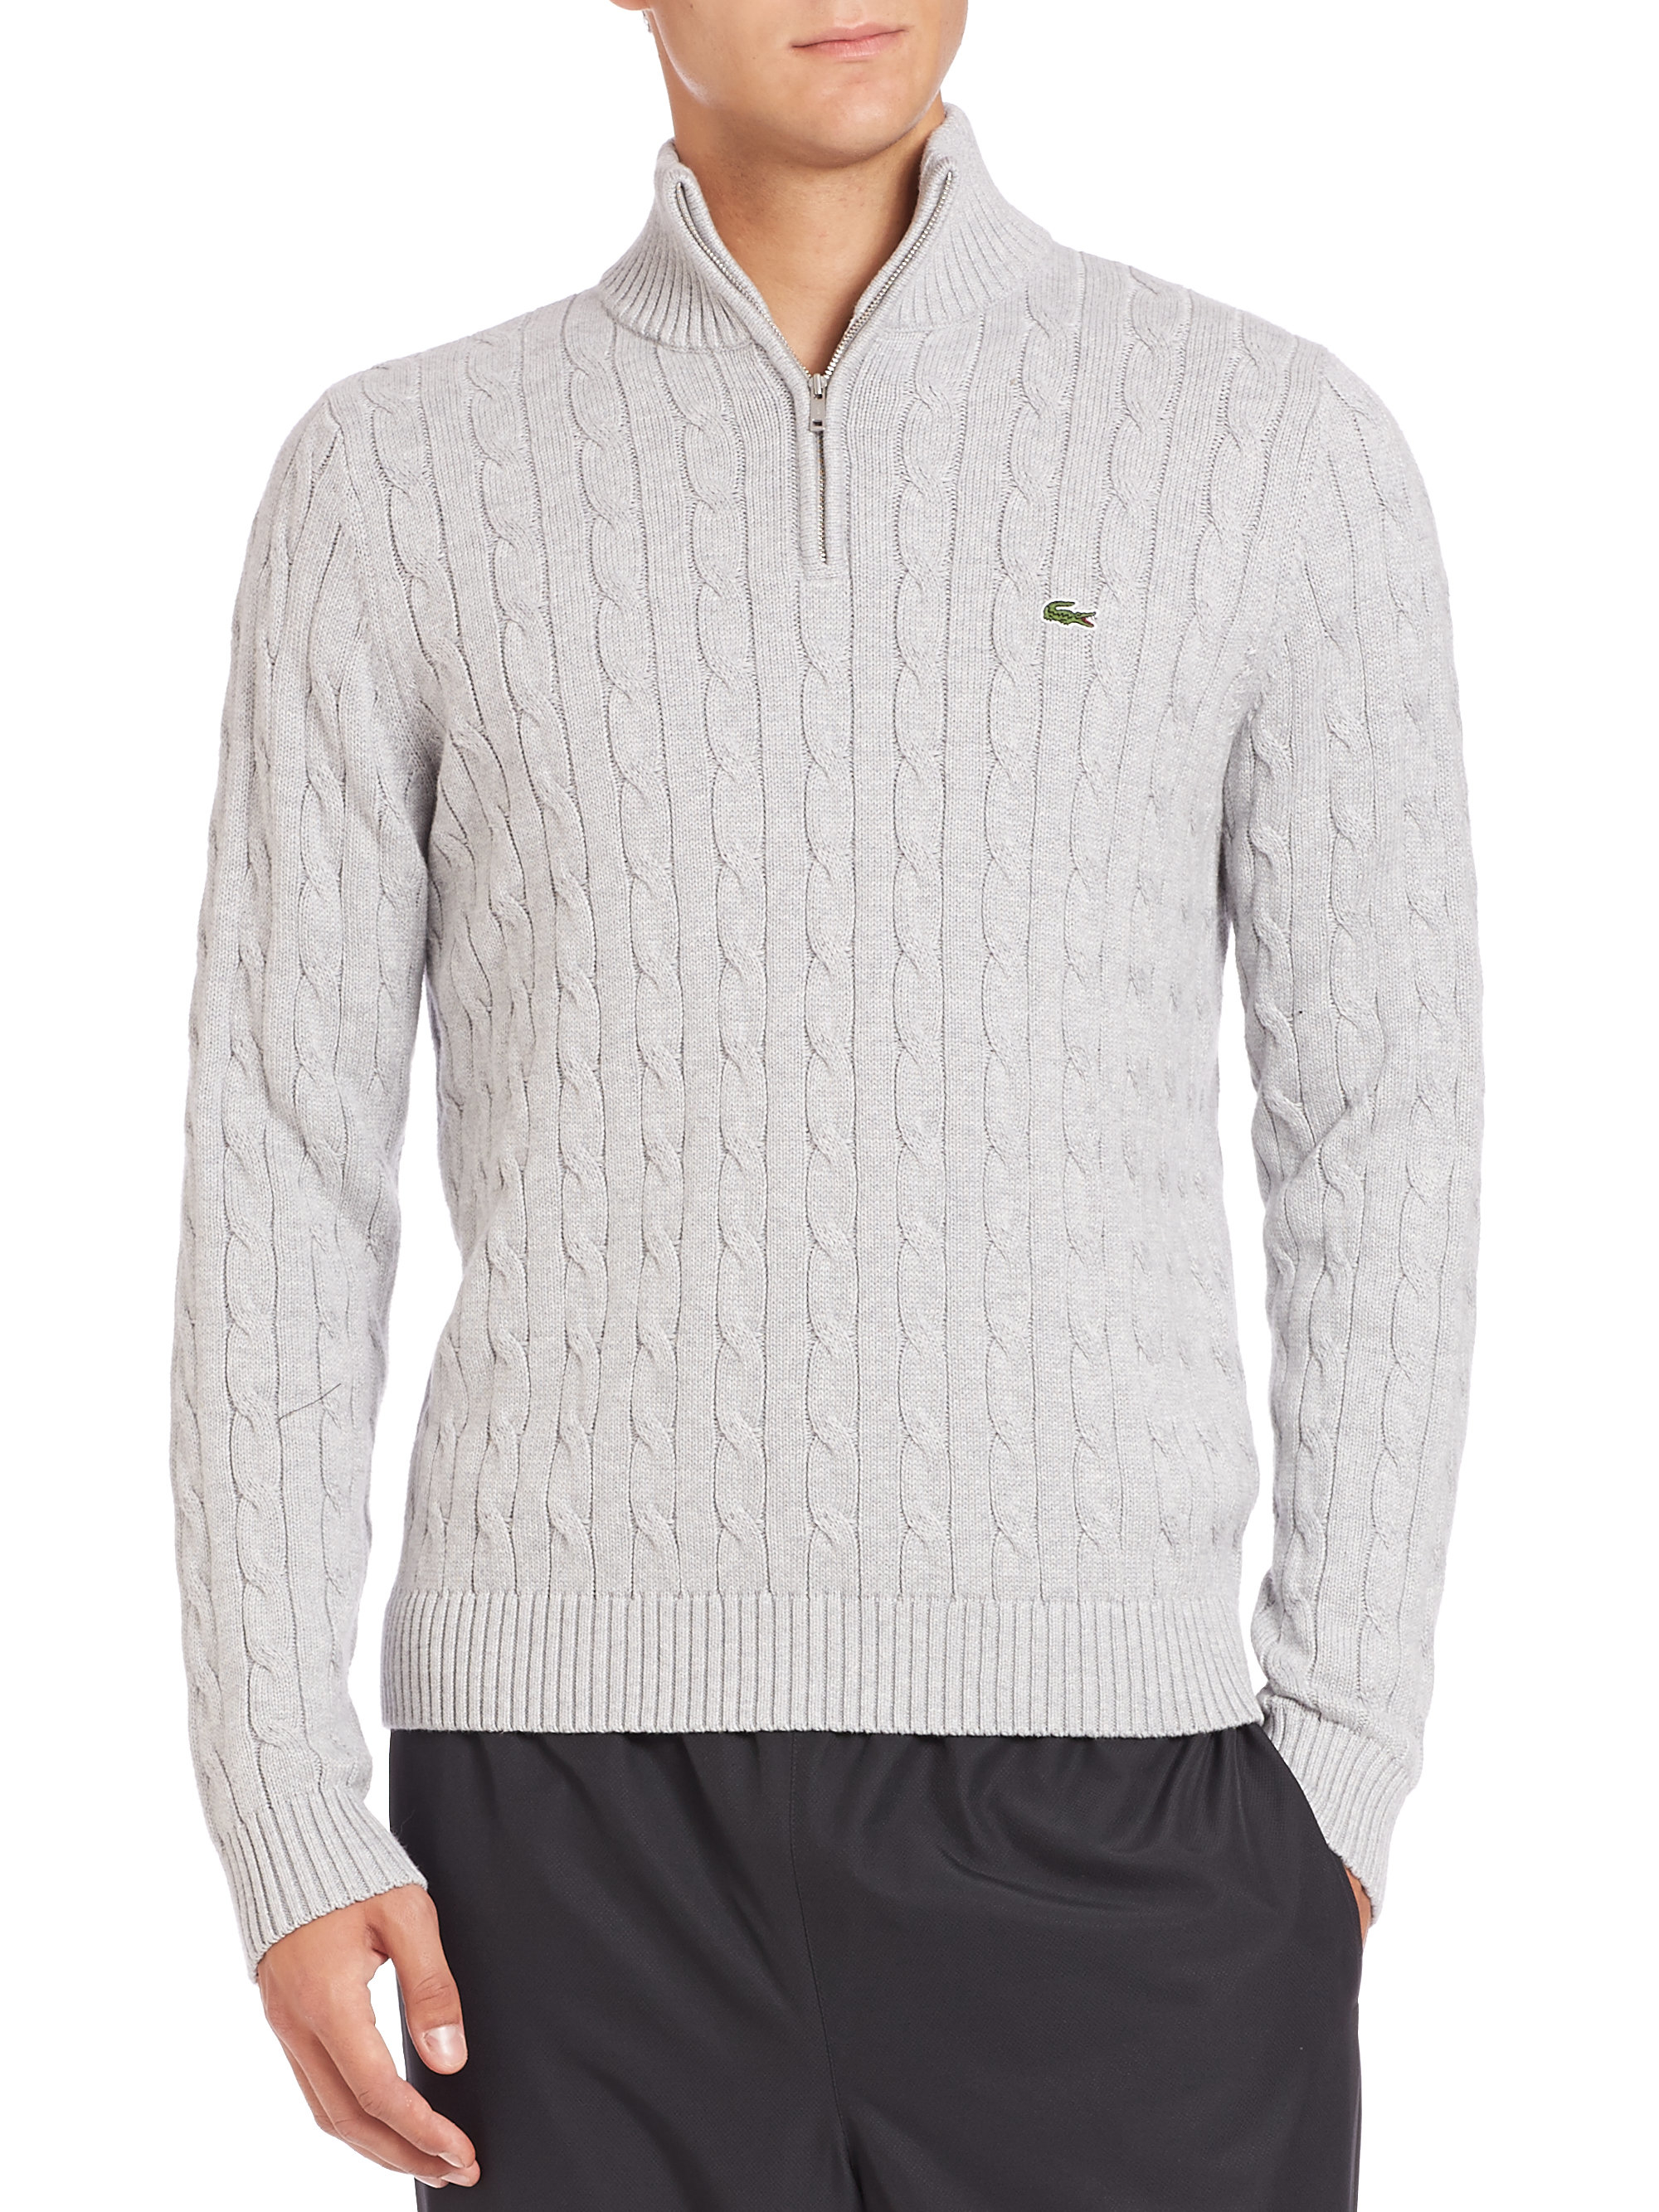 Lyst - Lacoste Cotton Cable-knit Sweater in Gray for Men